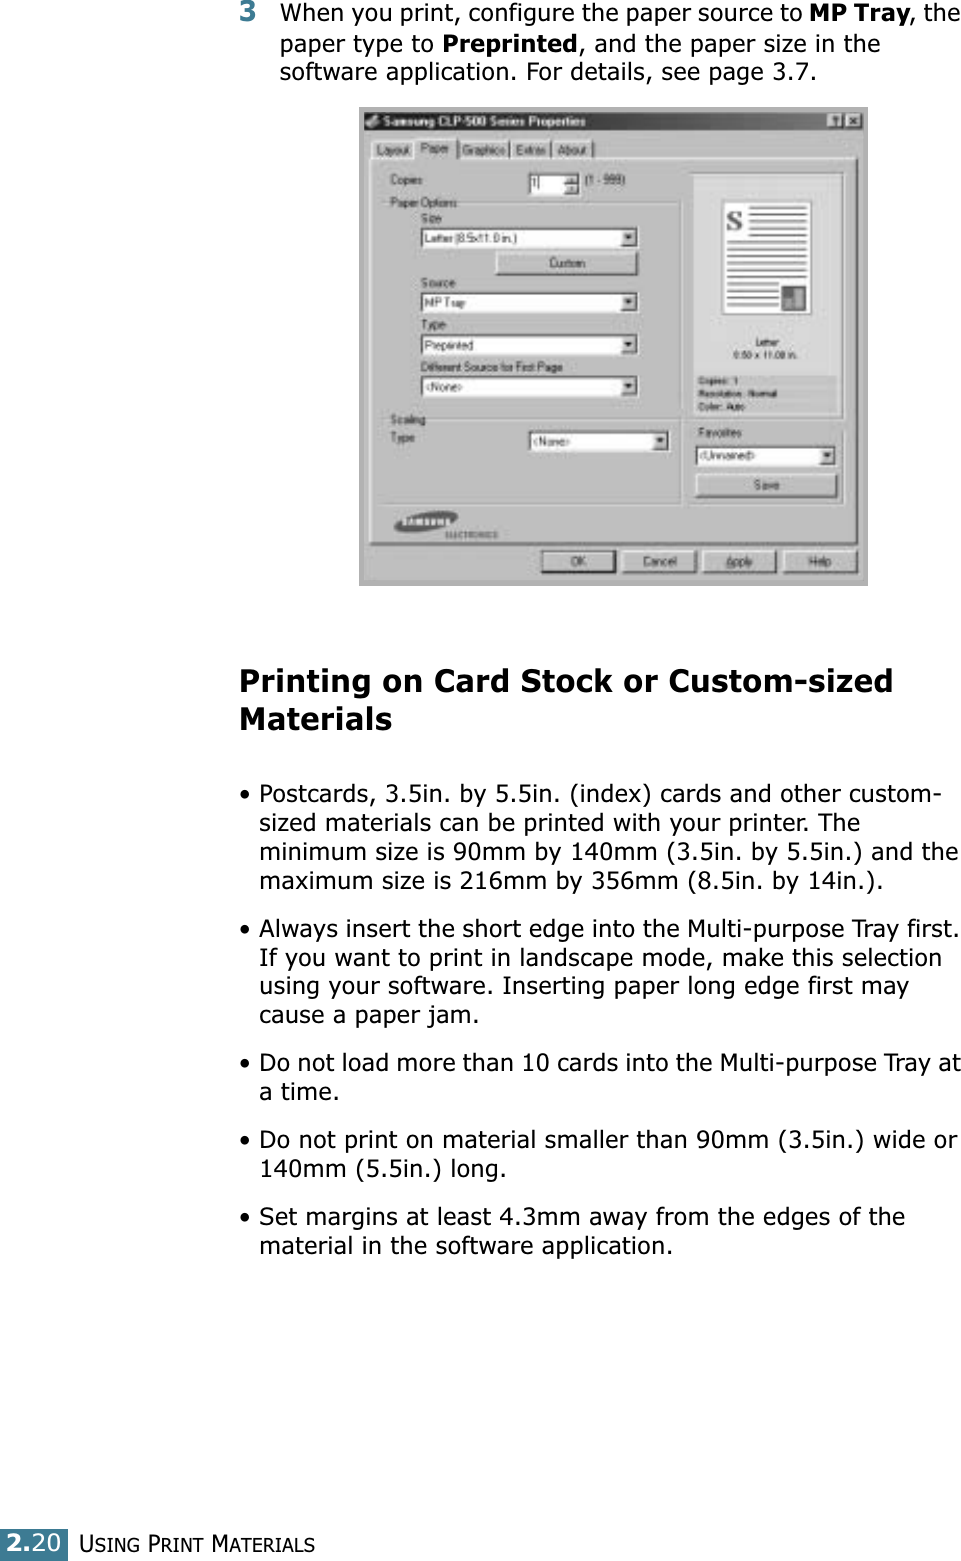 USING PRINT MATERIALS2.203When you print, configure the paper source to MP Tray, the paper type to Preprinted, and the paper size in the software application. For details, see page 3.7. Printing on Card Stock or Custom-sized Materials• Postcards, 3.5in. by 5.5in. (index) cards and other custom-sized materials can be printed with your printer. The minimum size is 90mm by 140mm (3.5in. by 5.5in.) and the maximum size is 216mm by 356mm (8.5in. by 14in.).• Always insert the short edge into the Multi-purpose Tray first. If you want to print in landscape mode, make this selection using your software. Inserting paper long edge first may cause a paper jam.• Do not load more than 10 cards into the Multi-purpose Tray at a time.• Do not print on material smaller than 90mm (3.5in.) wide or 140mm (5.5in.) long.• Set margins at least 4.3mm away from the edges of the material in the software application.